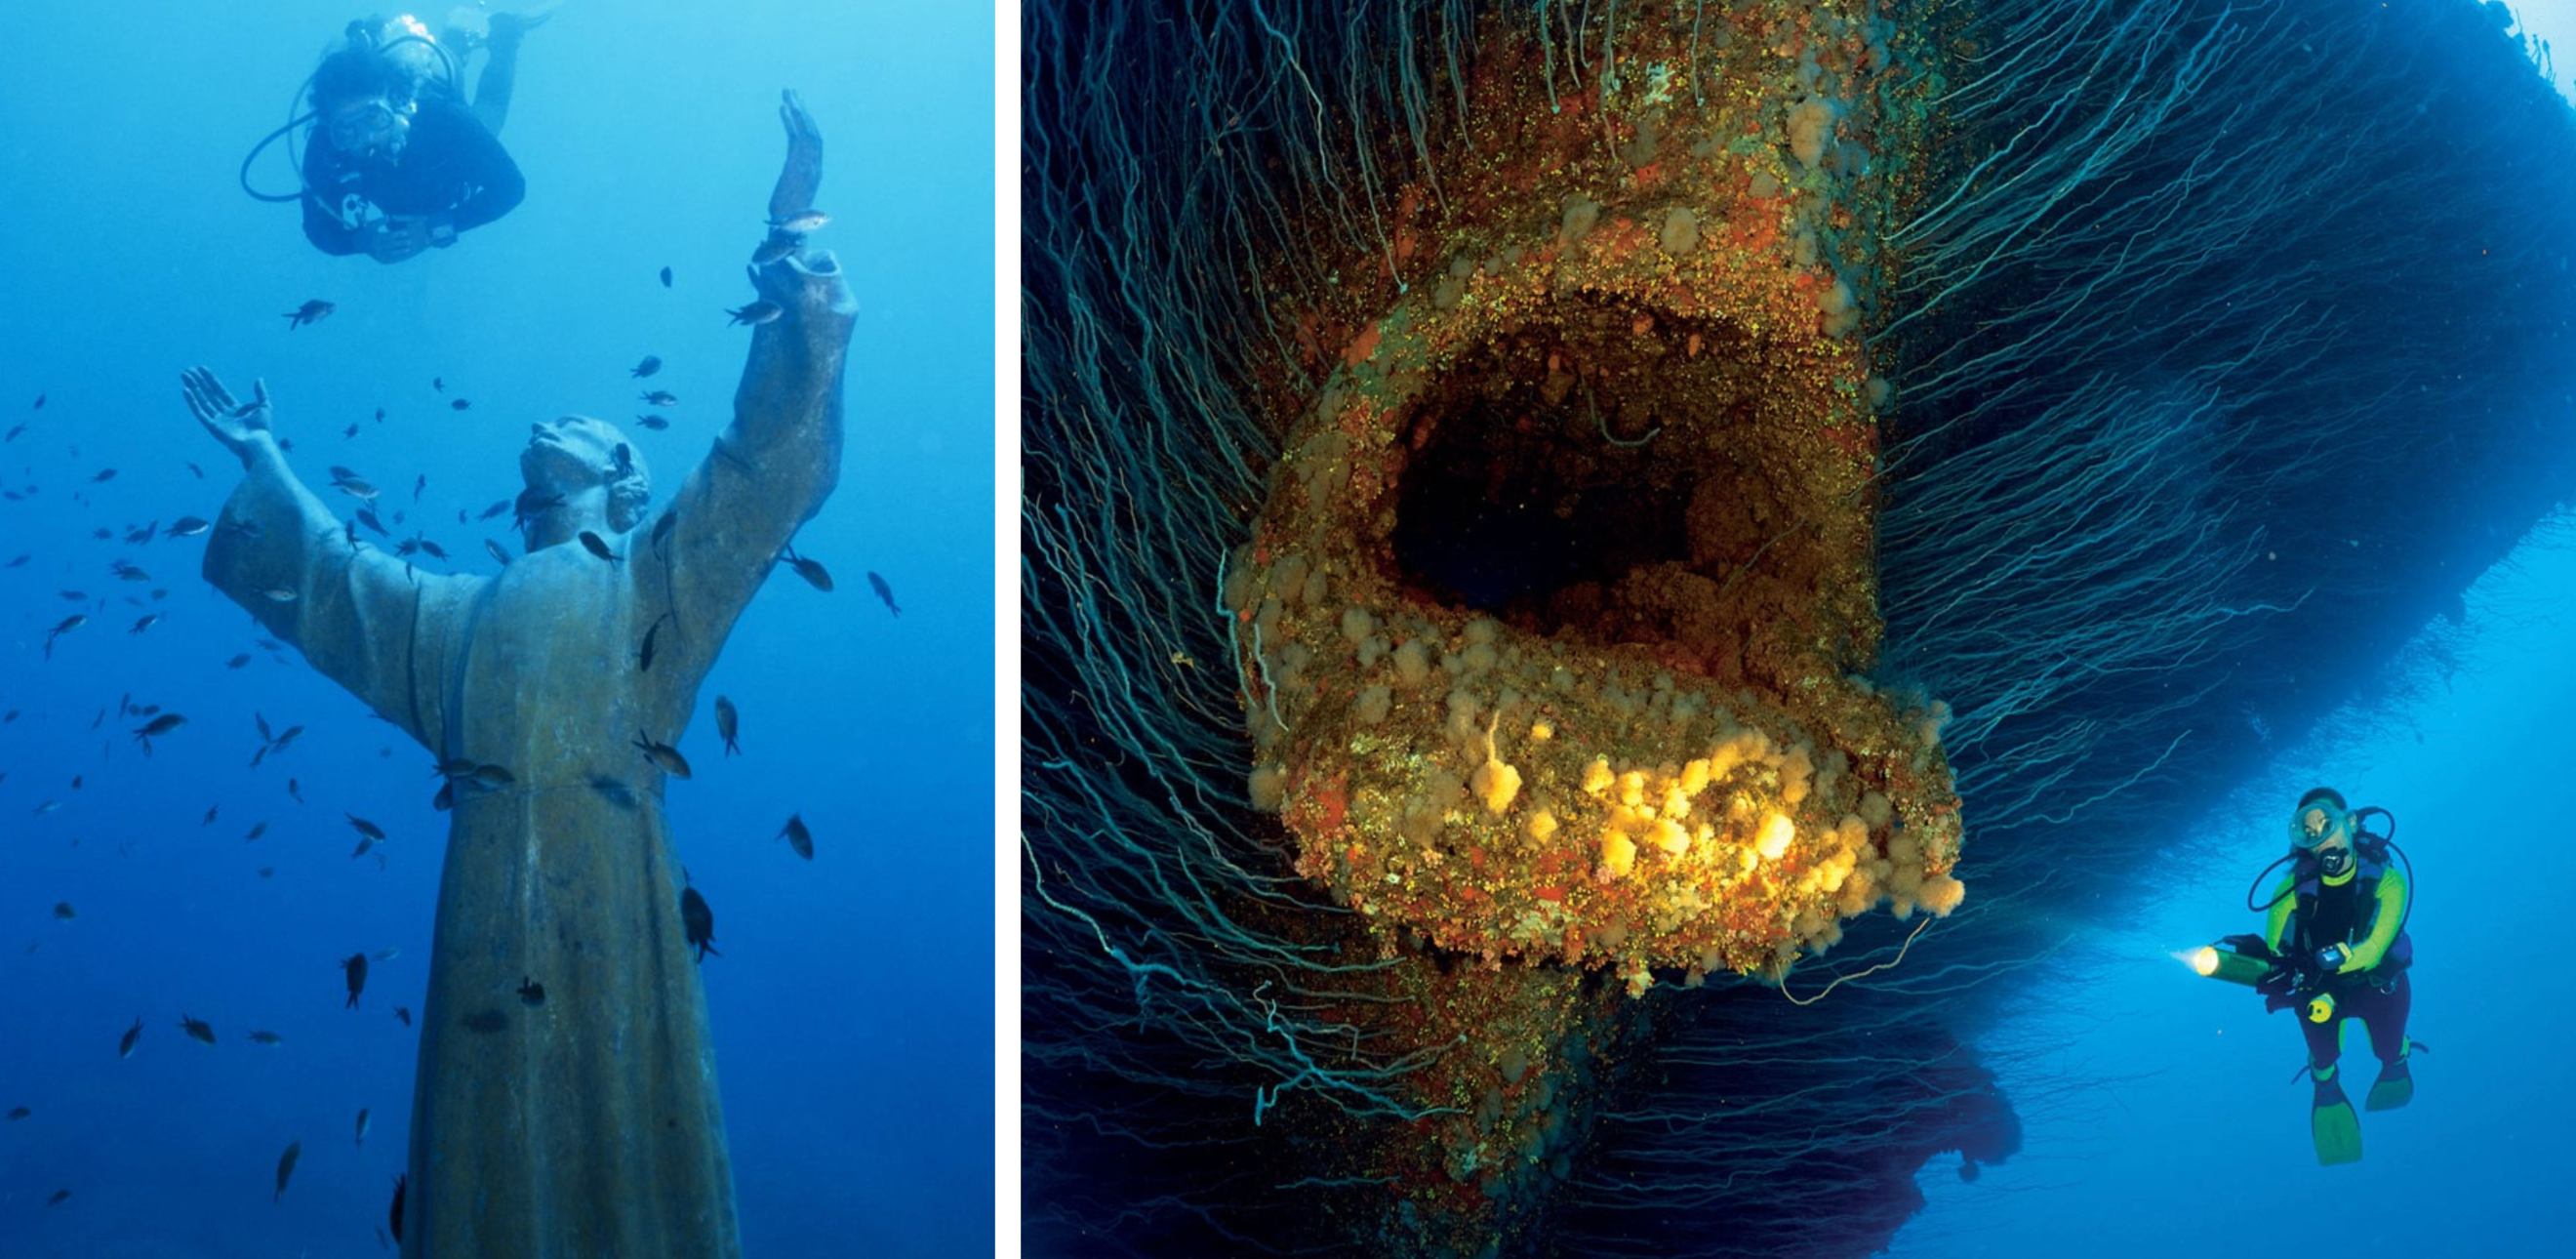 22 Unexpected Things People Discovered In The Deep Sea